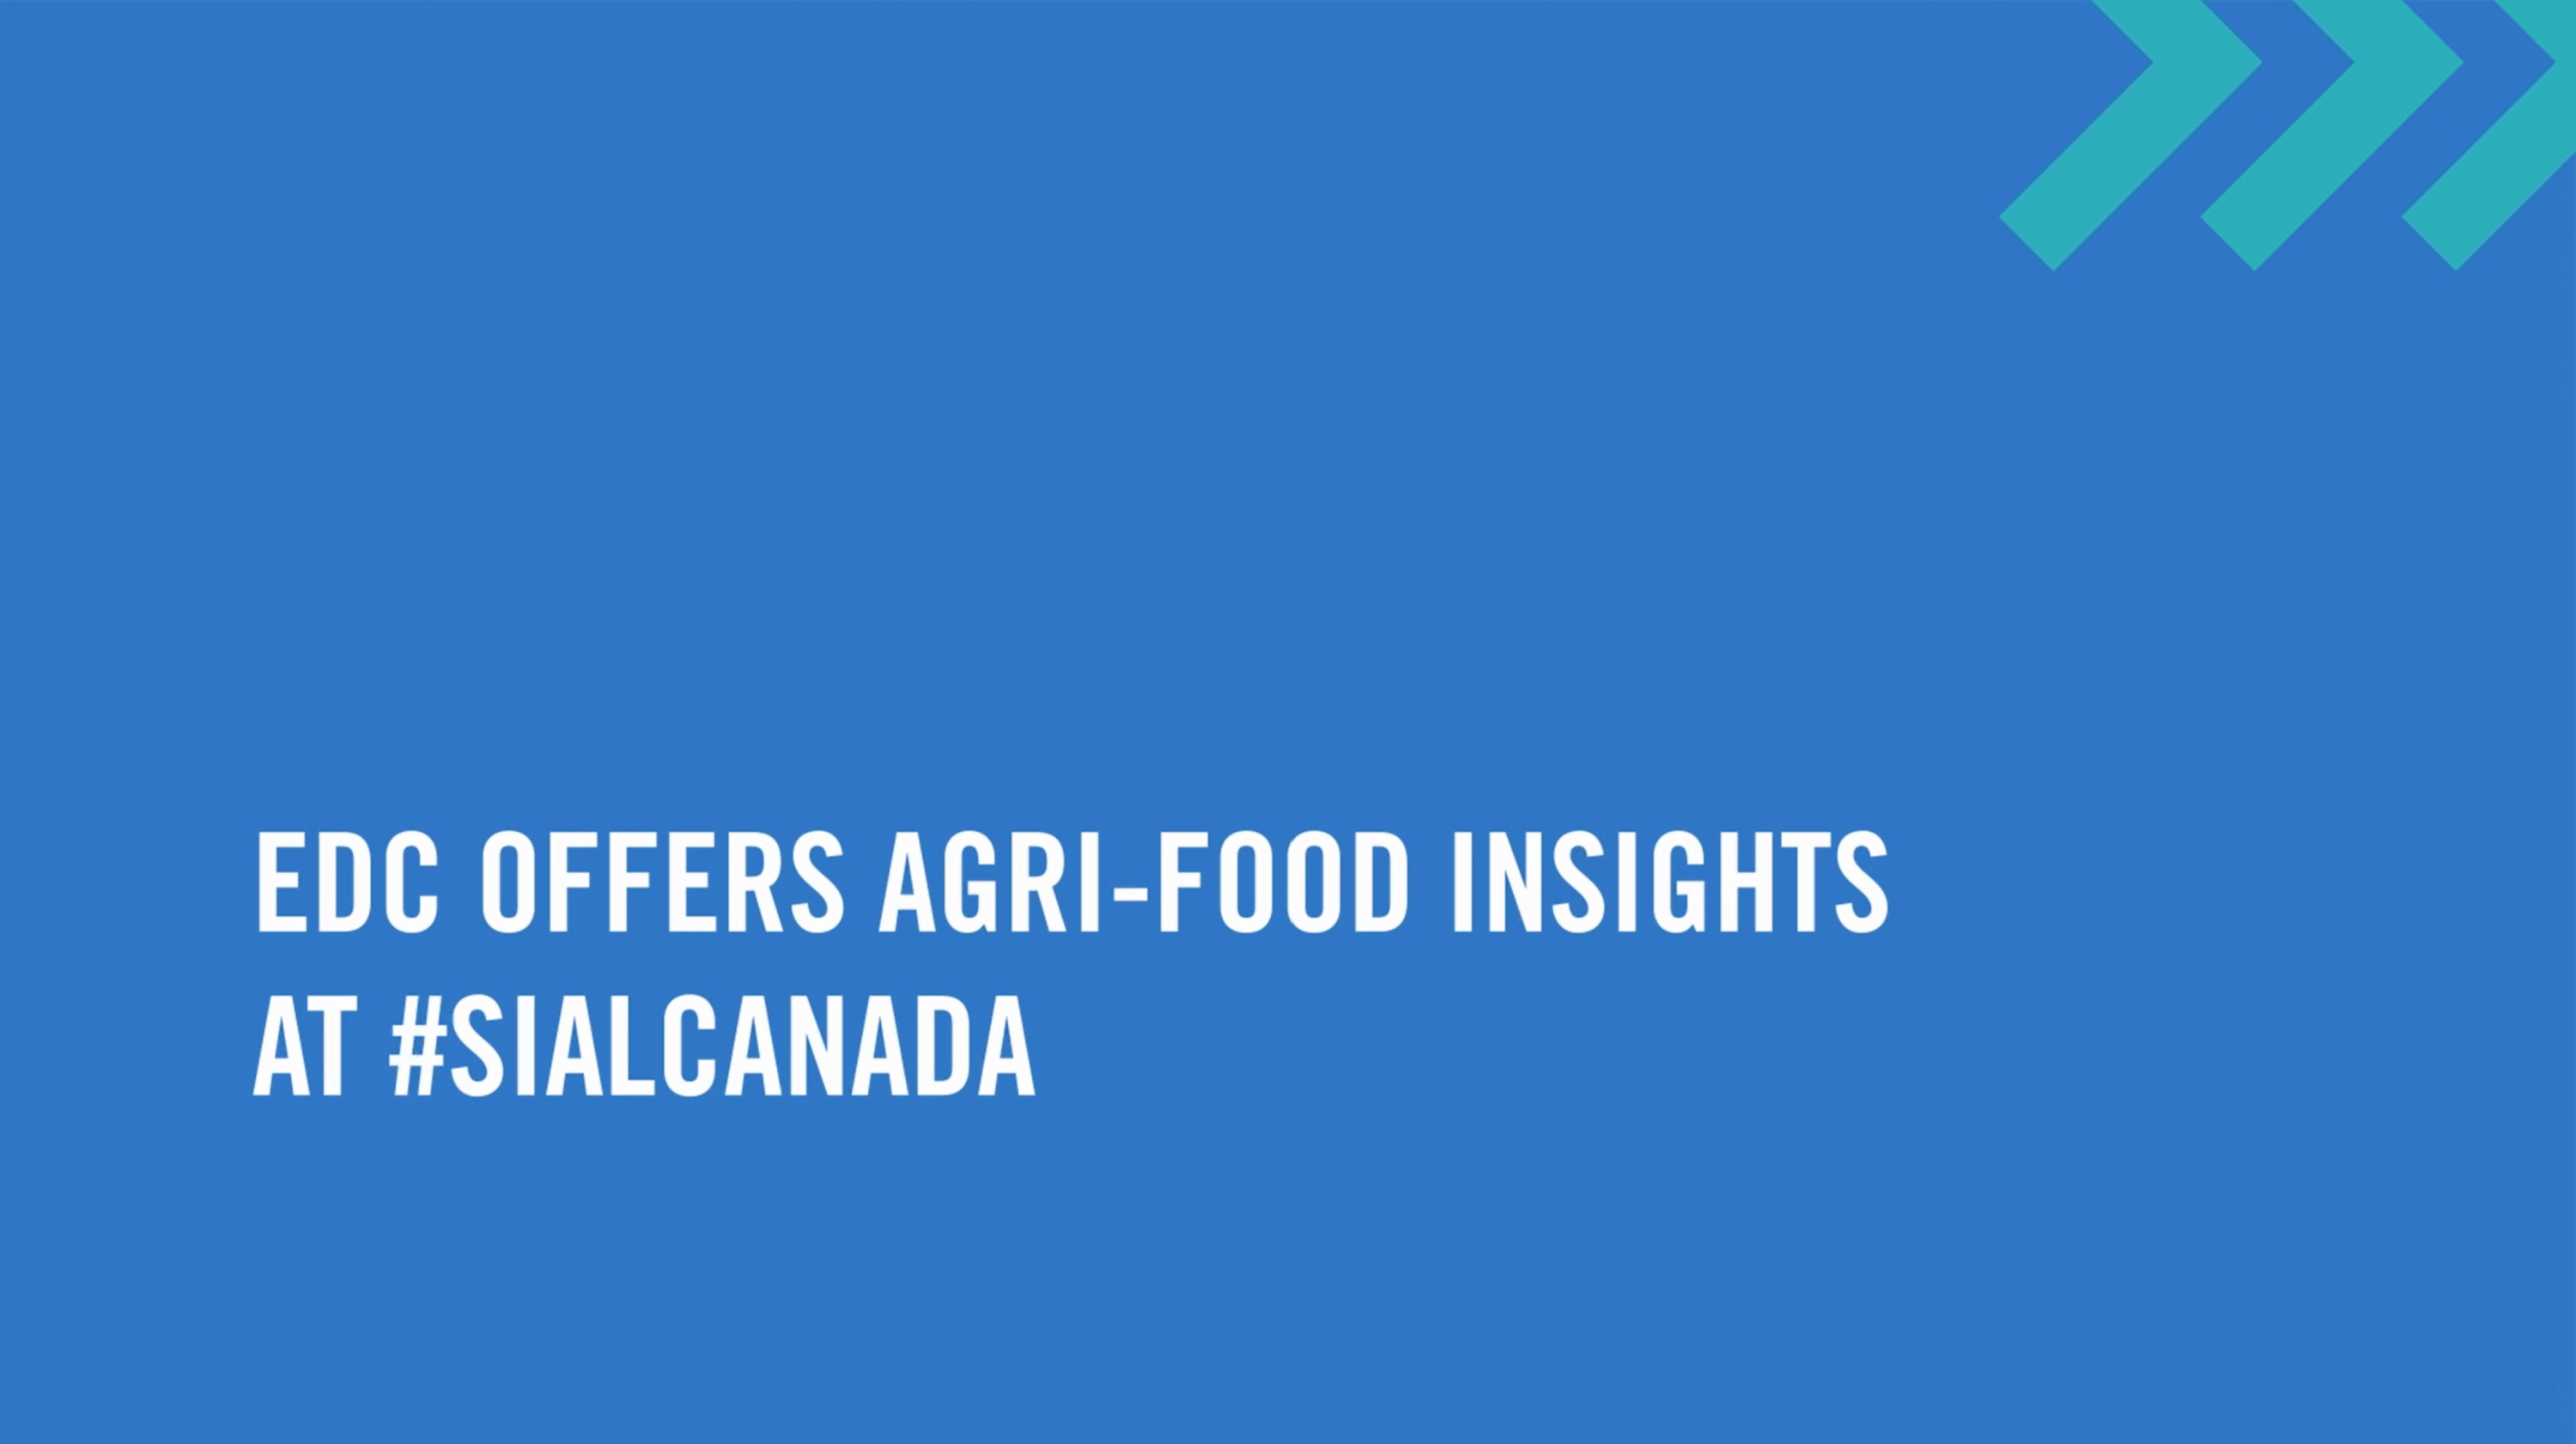 At SIAL Canada Ashley Kanary, Jessica Russell, and Zeeshanali Fazal share key insights into the latest agri-food industry trends and how EDC can help you grow.